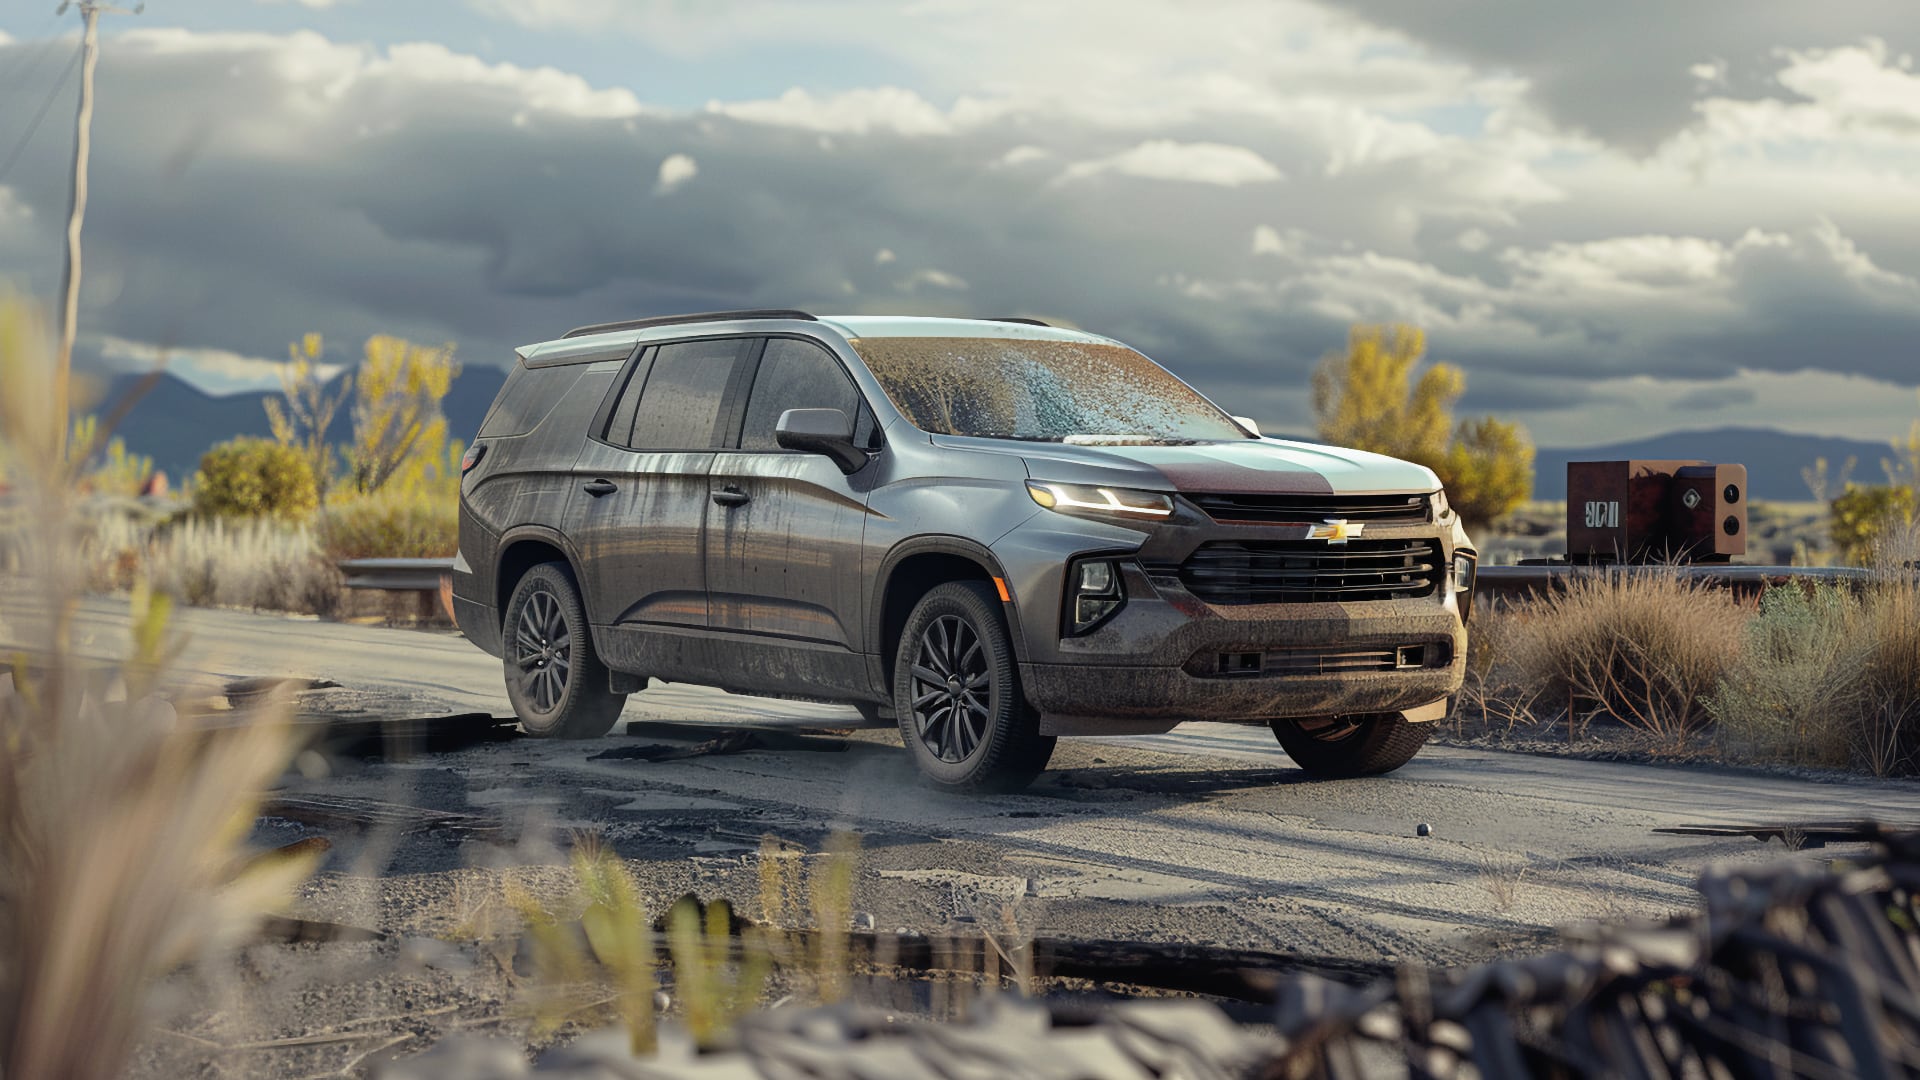 The 2020 Chevrolet Trailblazer, a Chevy model to avoid, is driving down a dirt road.